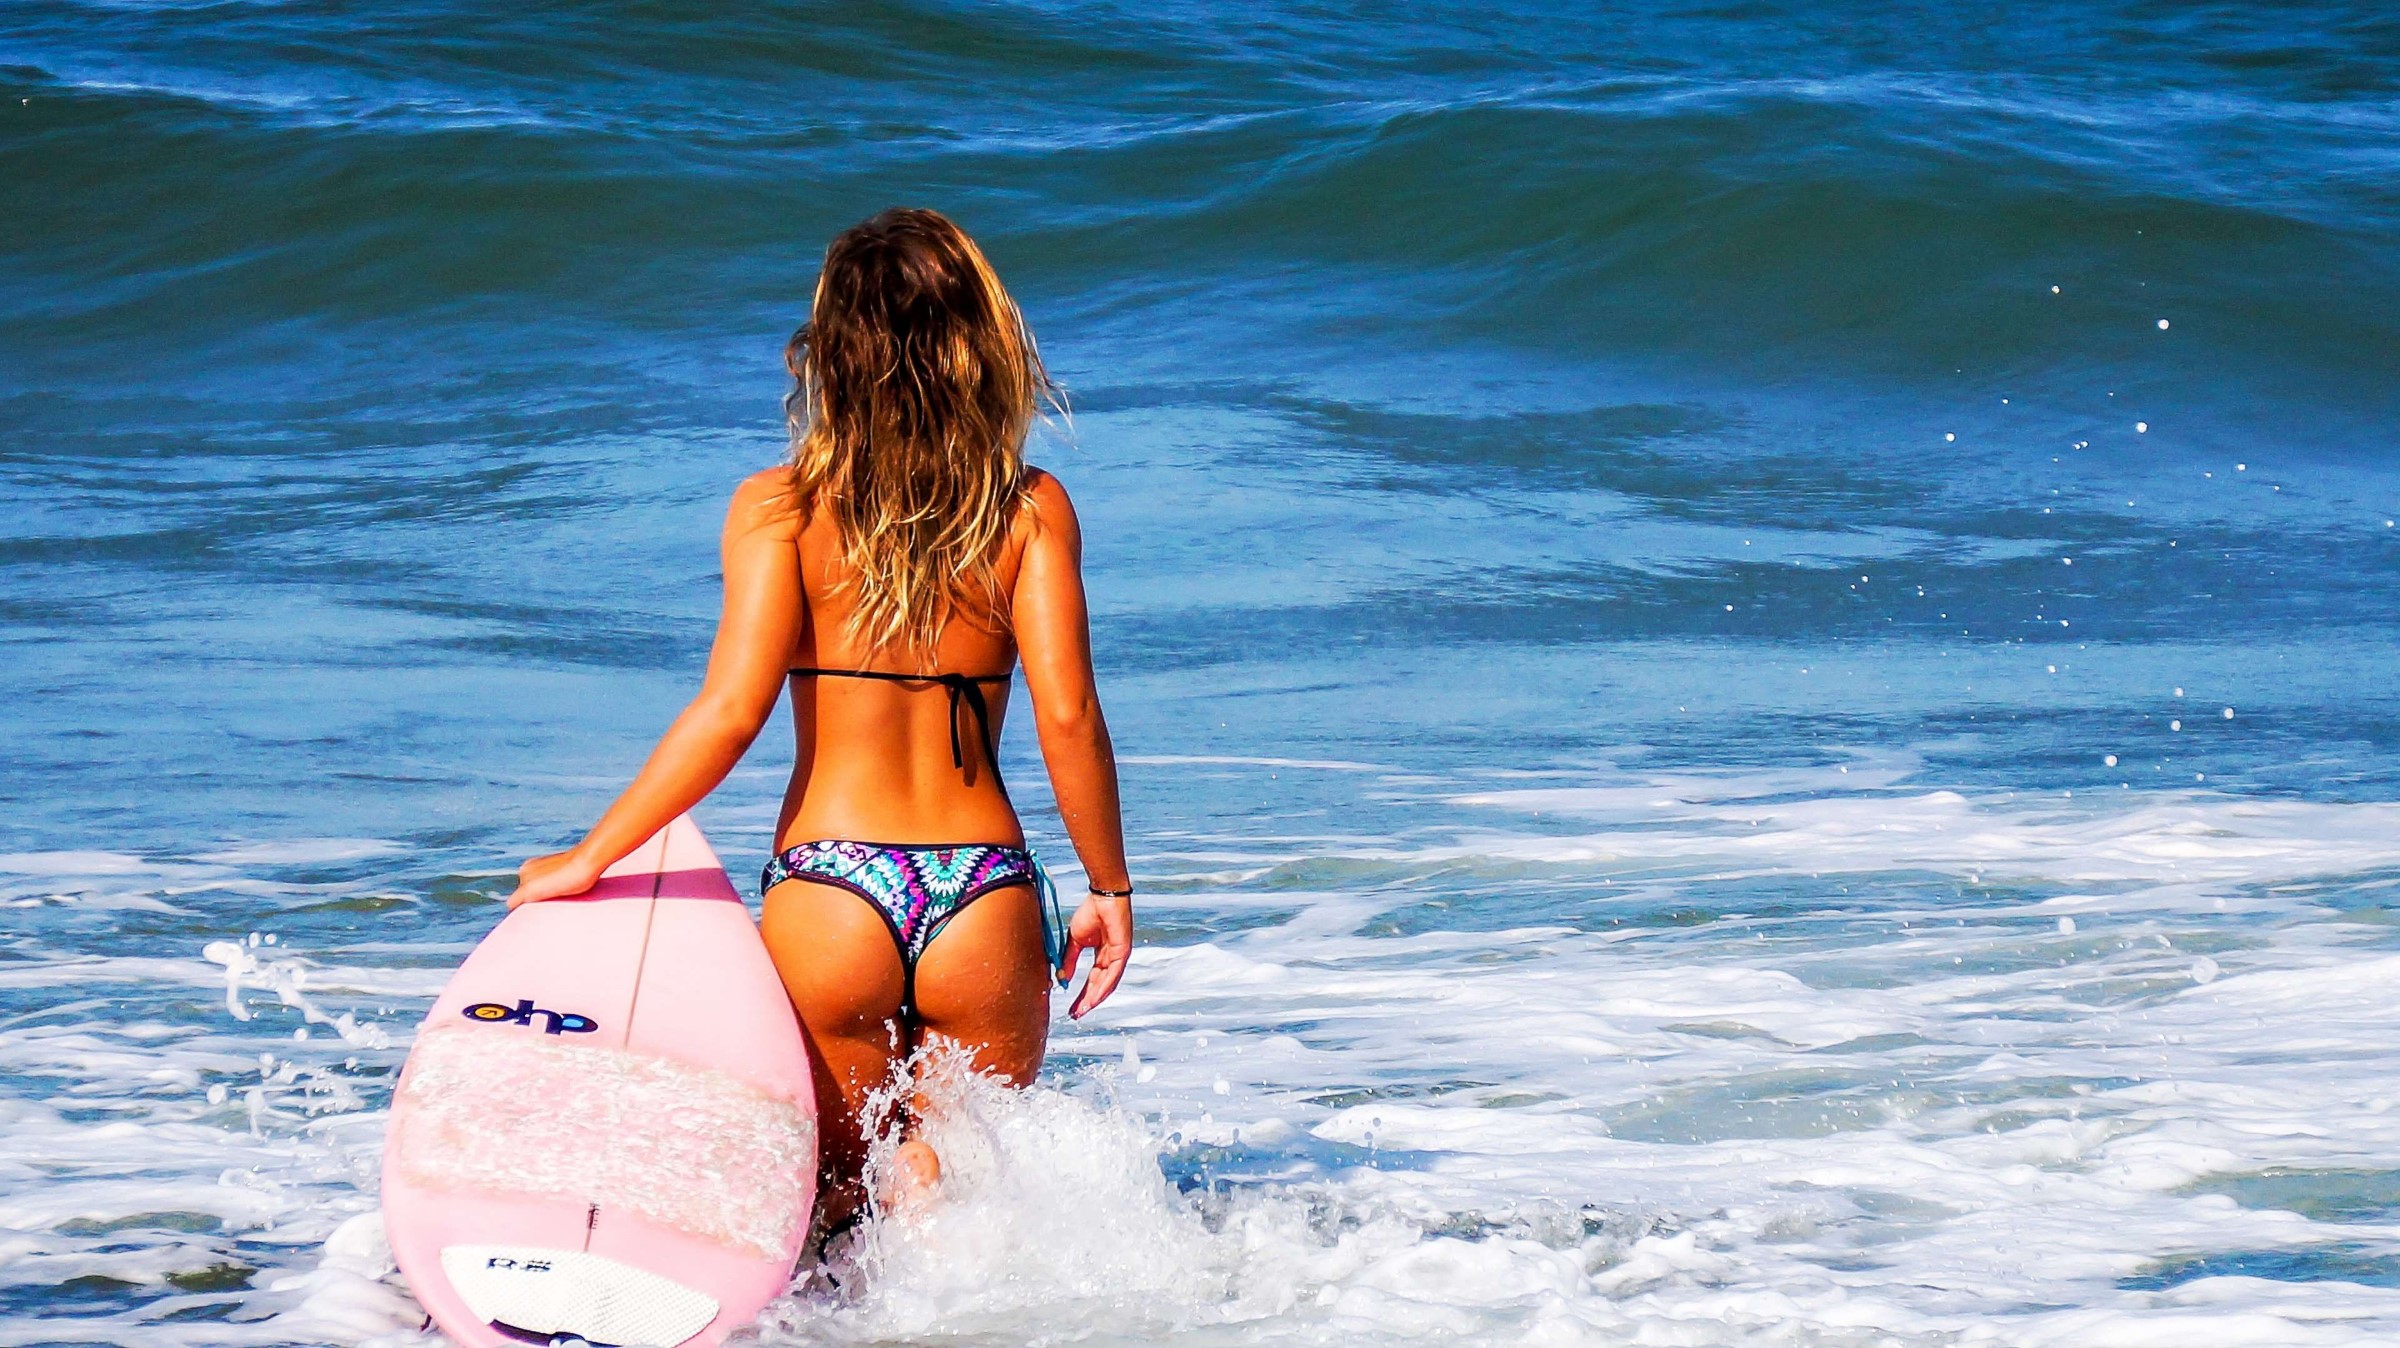 Young woman surfer